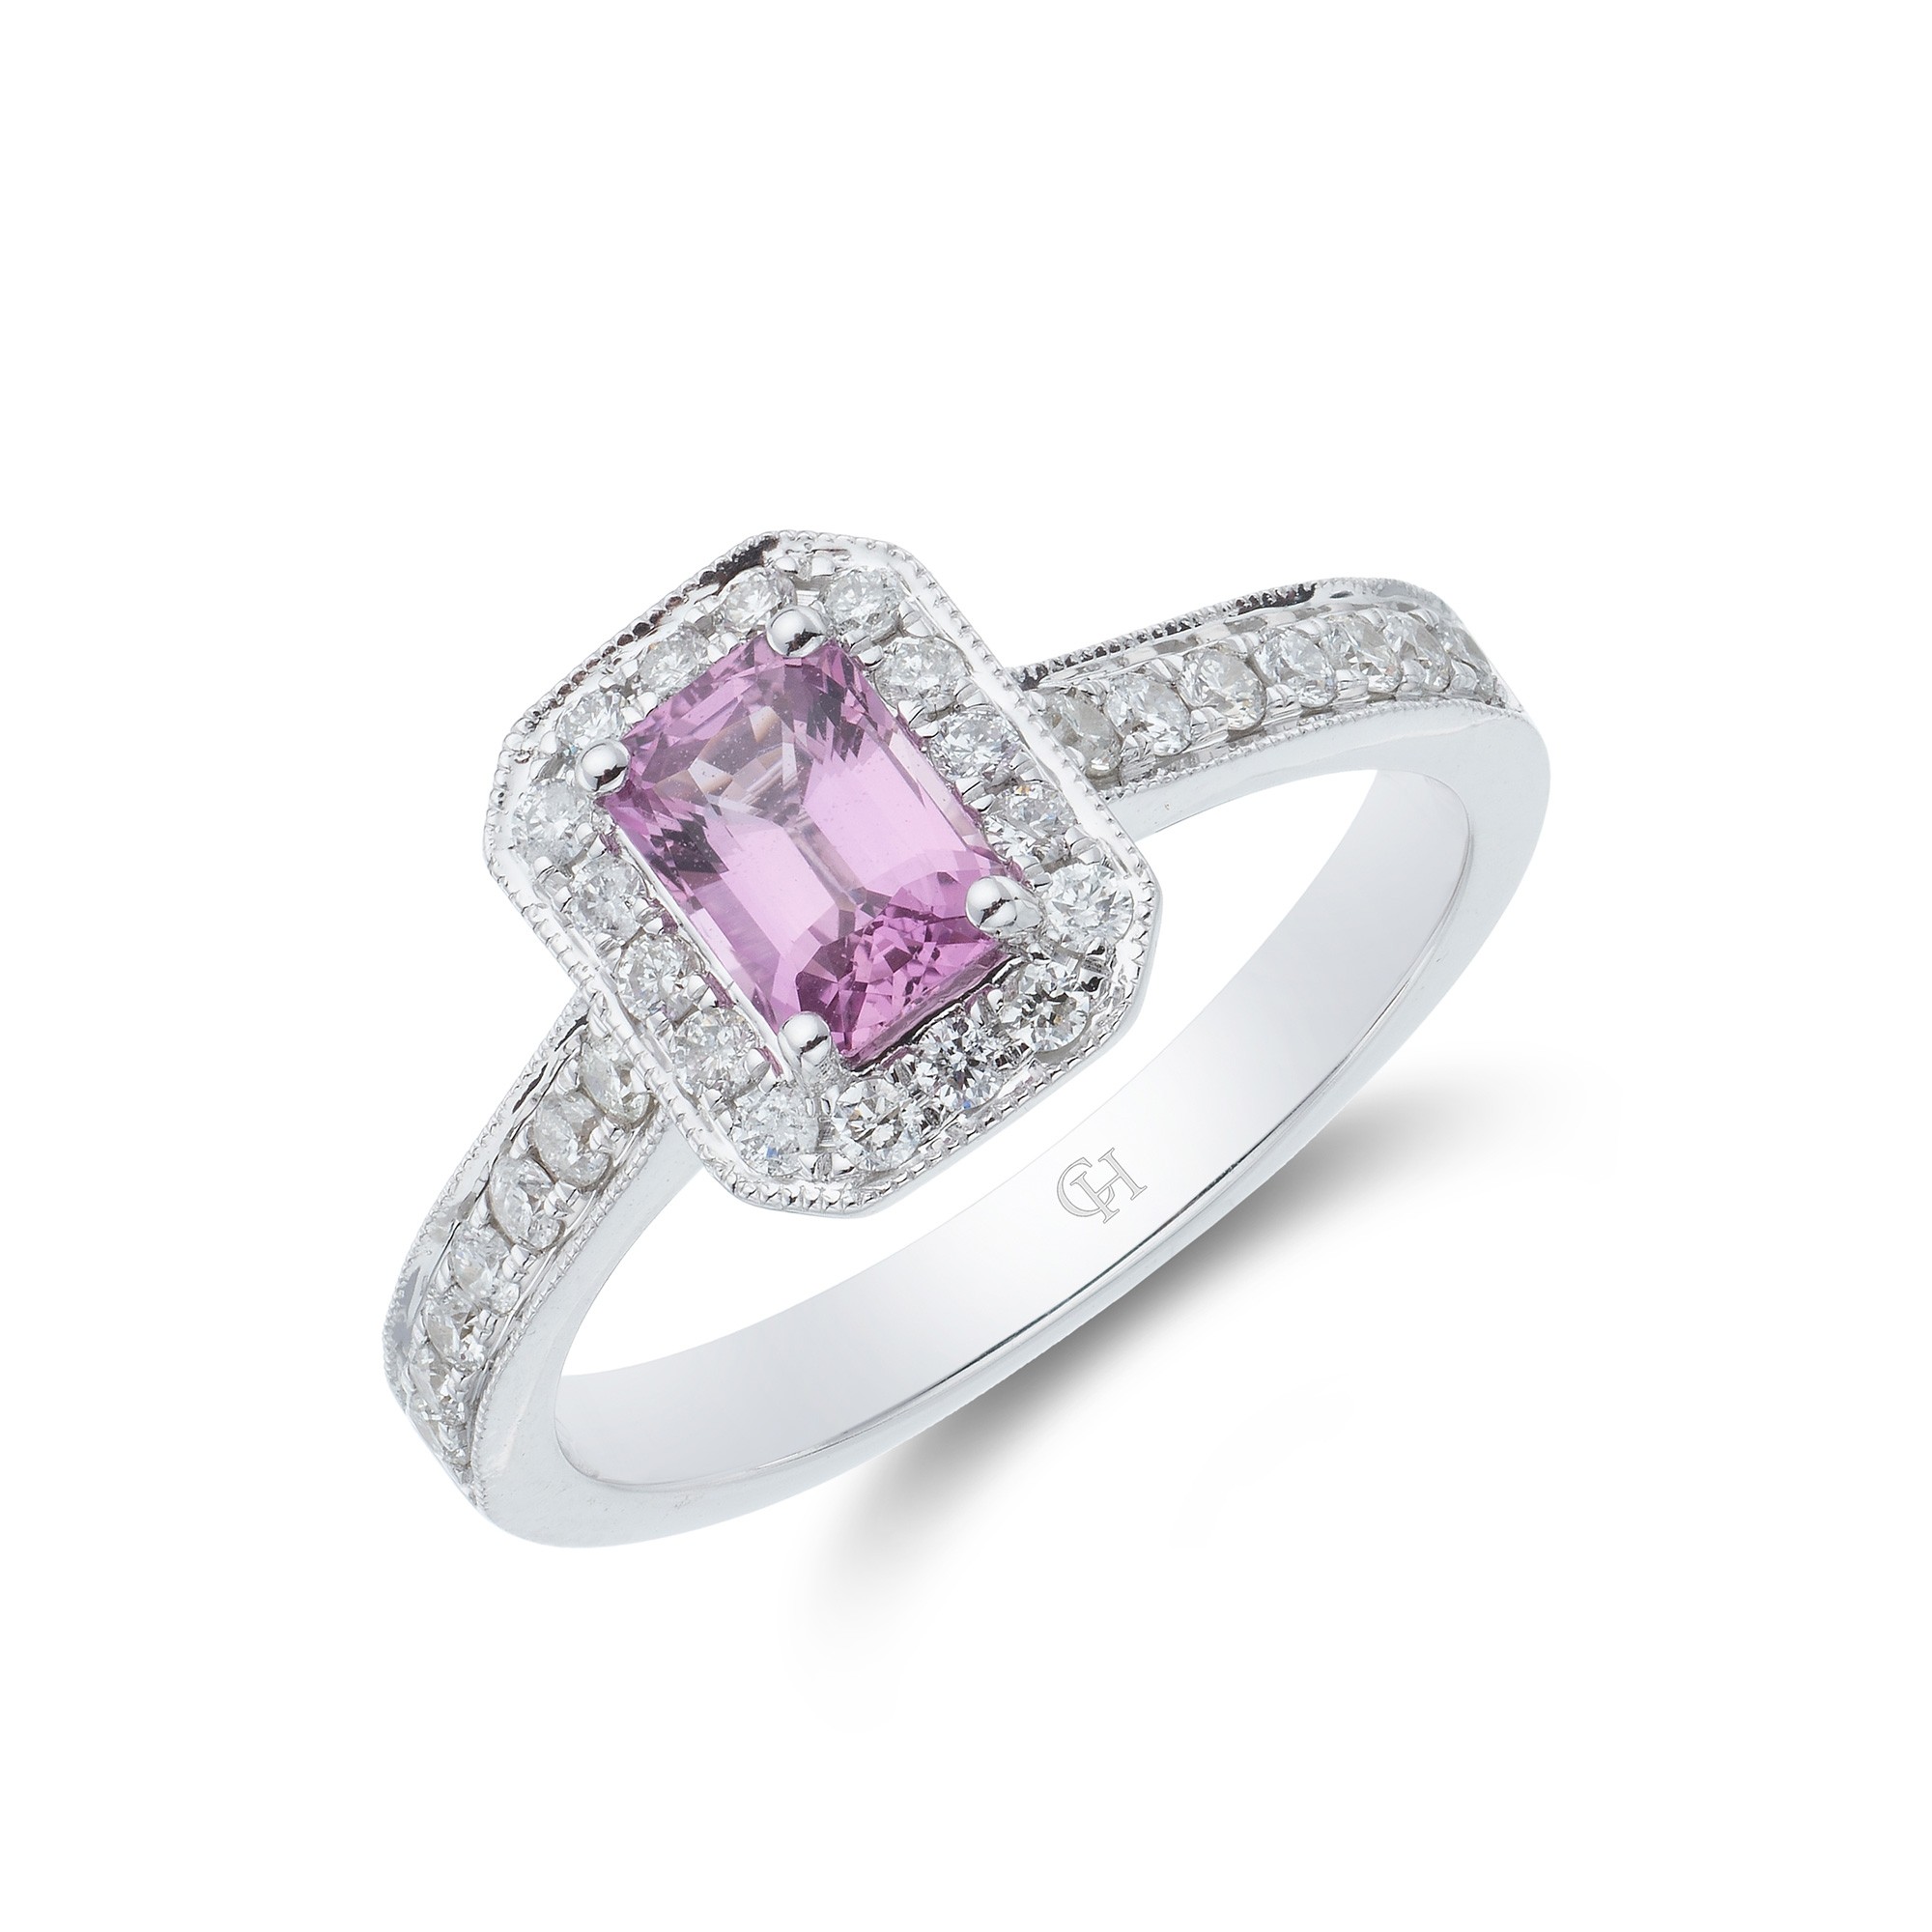 1 ct emerald cut pink cz solitaire ring in yellow gold